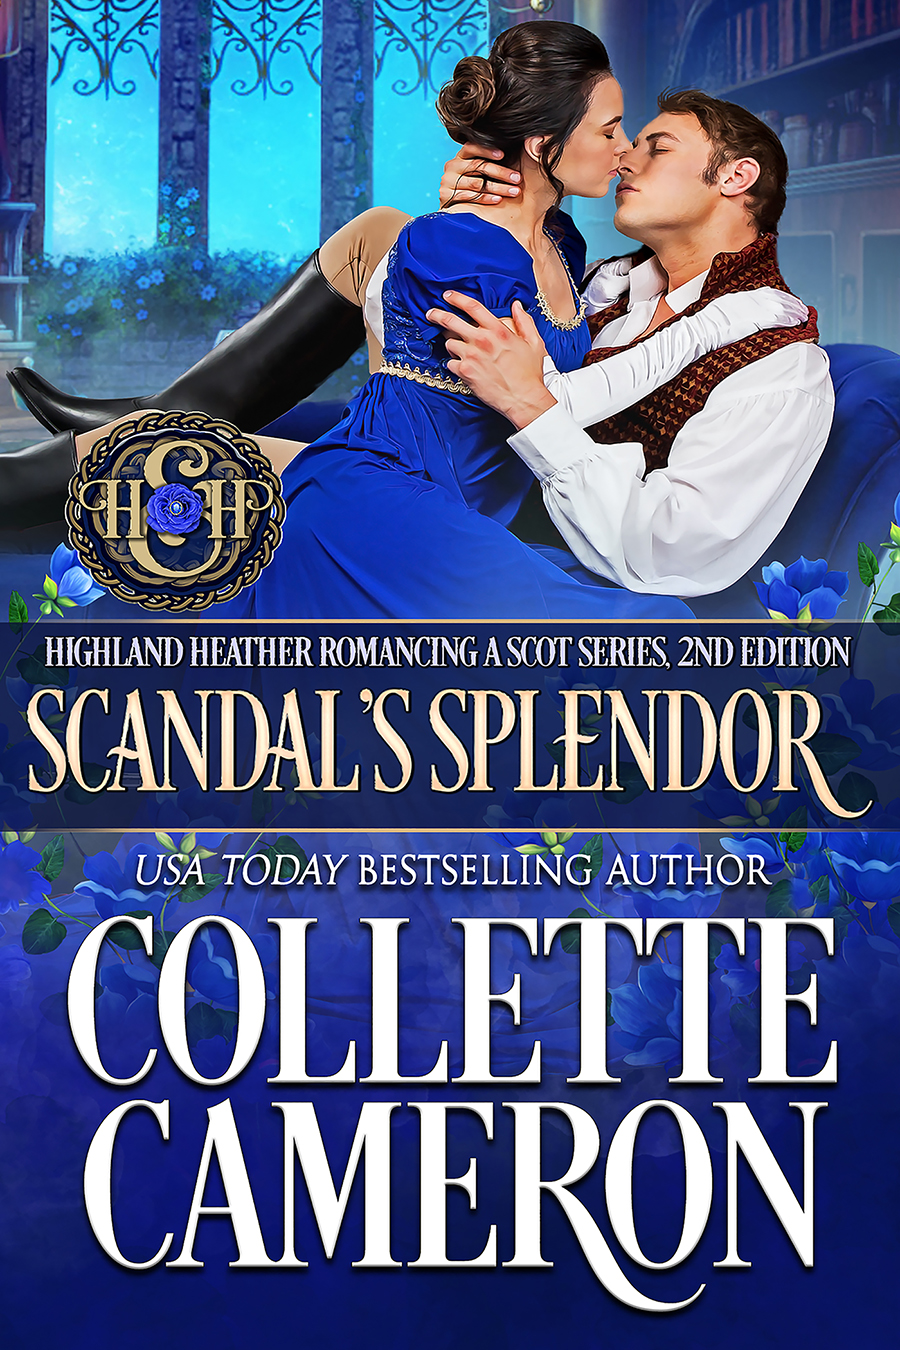 Scandal's Splendor, Highland Heather Romancing a Scot Series, USA Today Bestselling Author Collette Cameron, Collette Cameron historical romances, Collette Cameron Regency romances, Collette Cameron romance novels, Collette Cameron Scottish historical romance books, Blue Rose Romance, Bestselling historical romance authors, historical romance novels, Regency romance novels, Highlander romance books, Scottish romance novels, romance novel covers, Bestselling romance novels, Bestselling Regency romances, Bestselling Scottish Romances, Bestselling Highlander romances, Victorian Romances, lords and ladies romance novels, Regency England Dukes romance books, aristocrats and royalty, happily ever after novels, love stories, wallflowers, rakes and rogues, award-winning books, Award-winning author, historical romance audio books, collettecameron.com, The Regency Rose Newsletter, Sweet-to-Spicy Timeless Romance, historical romance meme, romance meme, historical regency romance 